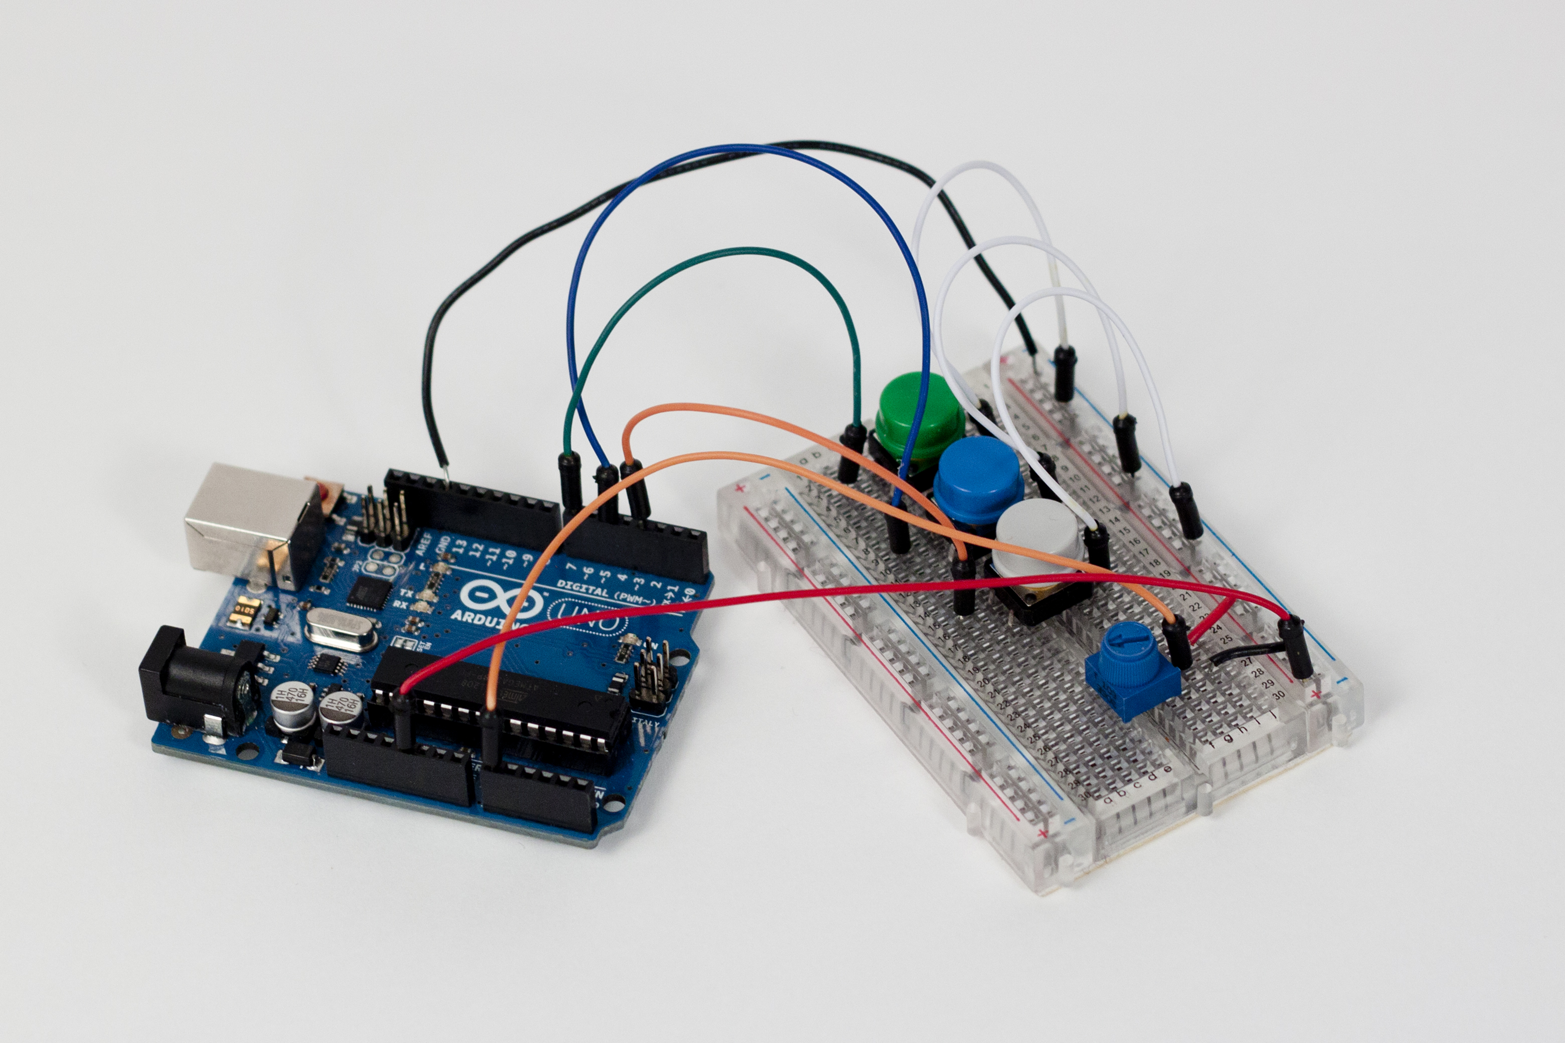 An Arduino Uno with a breadboard allows for making simple or complex circuits without soldering